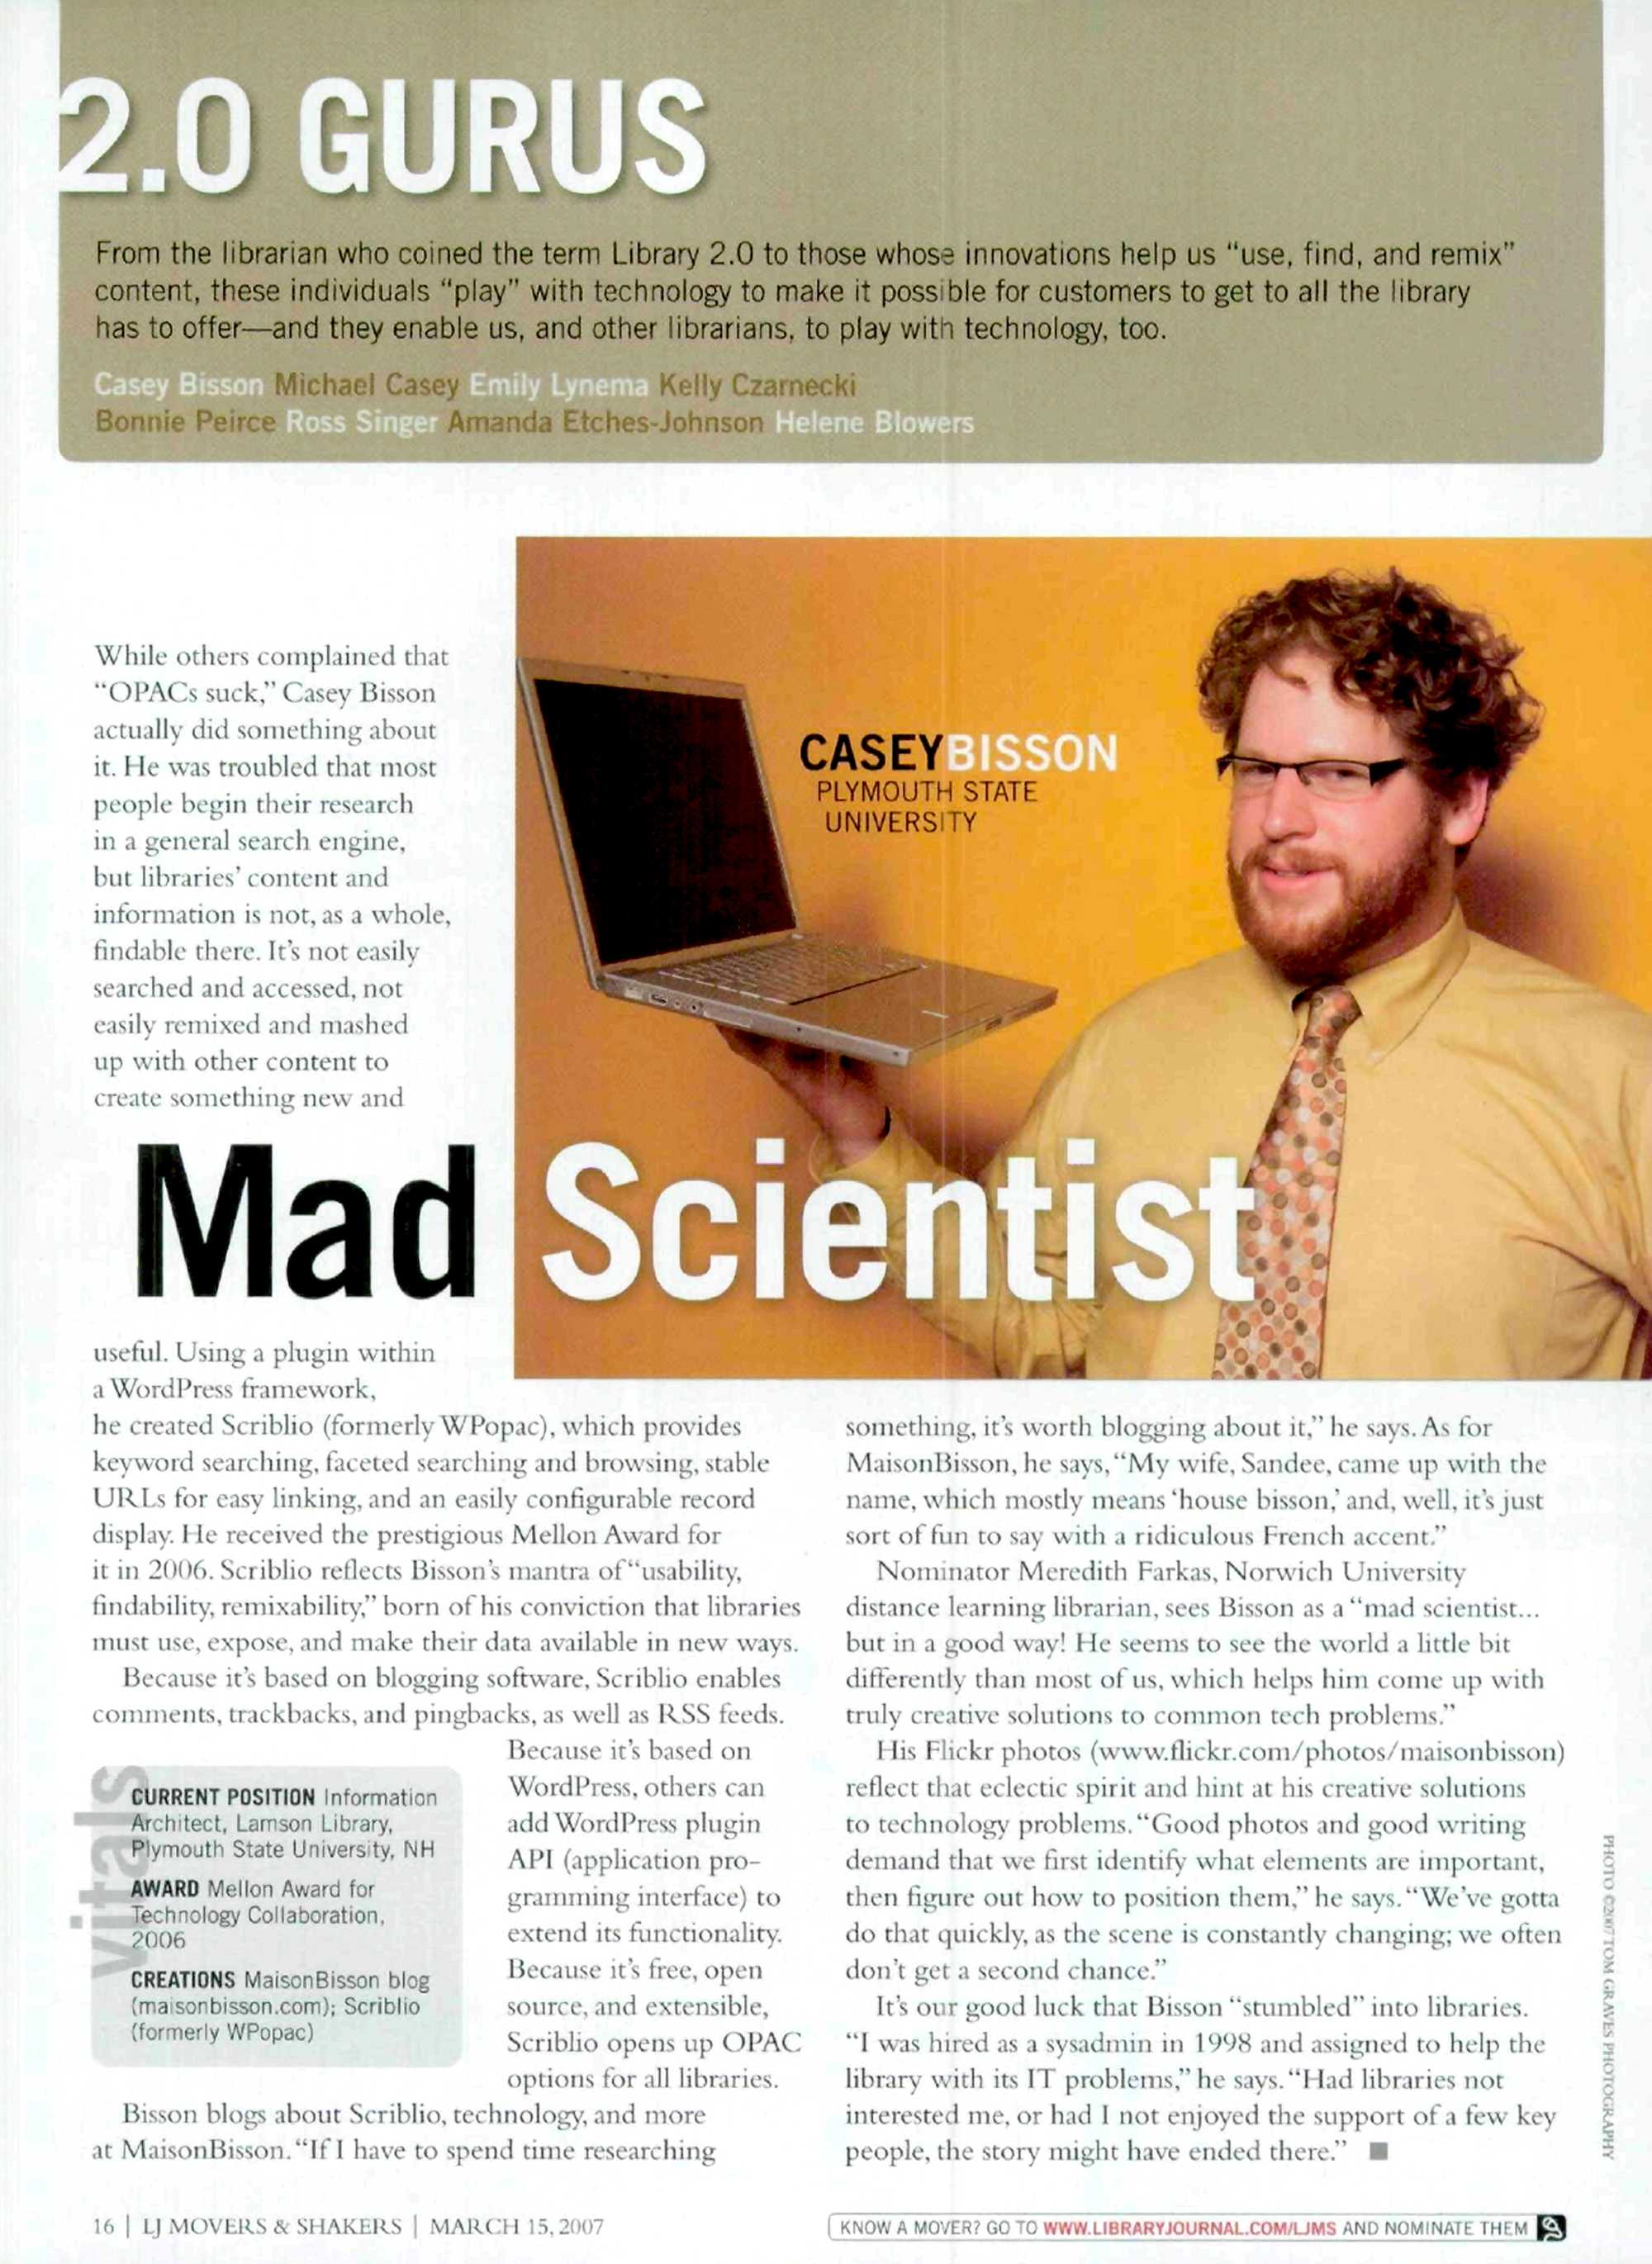 The Library Journal profile as it appeared in the magazine in March 2007.